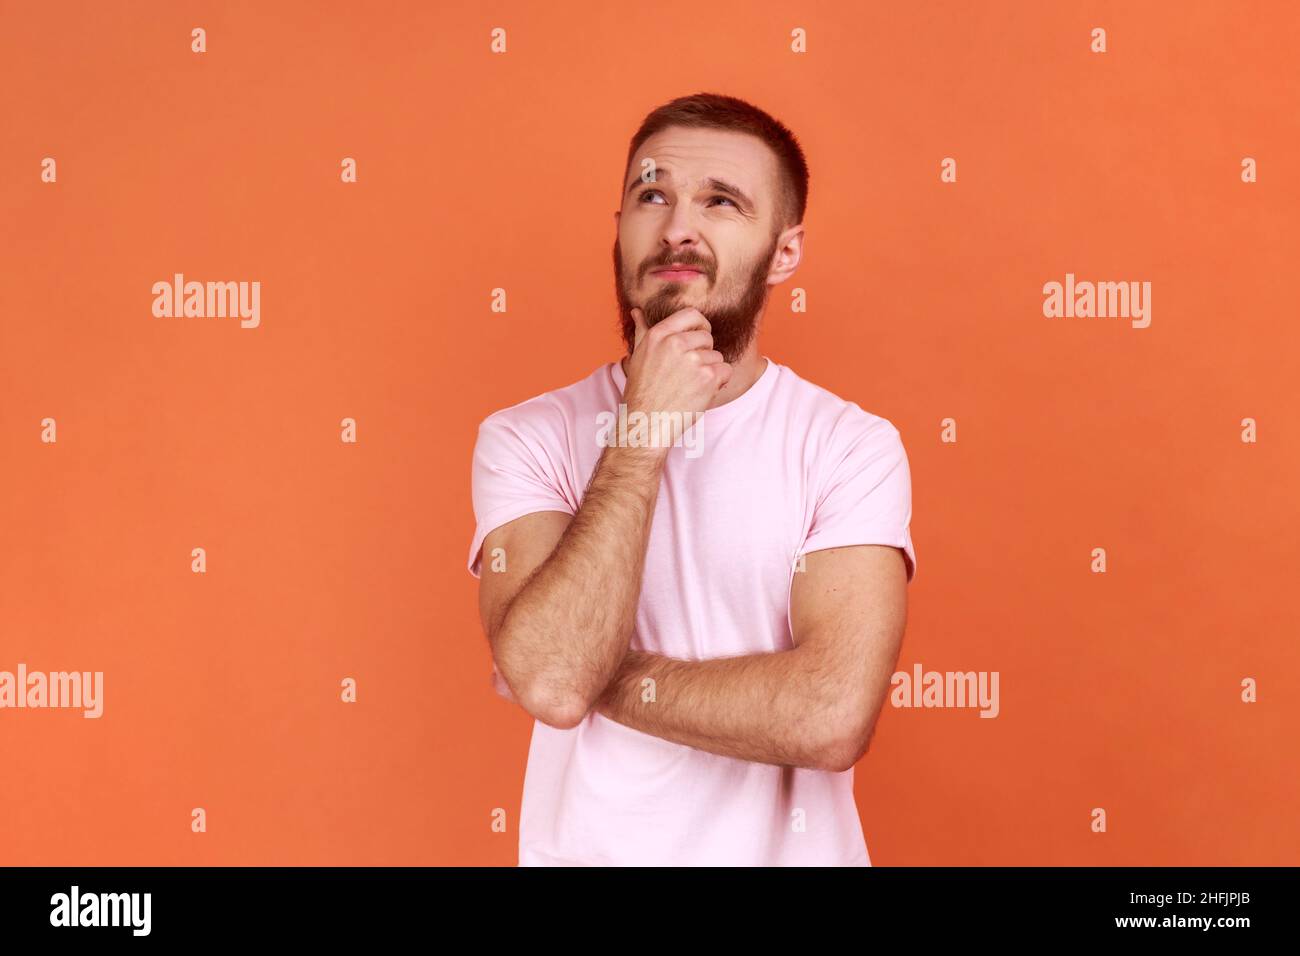 Portrait of thoughtful handsome bearded man holding his chin and pondering idea, confused not sure about solution, wearing pink T-shirt. Indoor studio shot isolated on orange background. Stock Photo